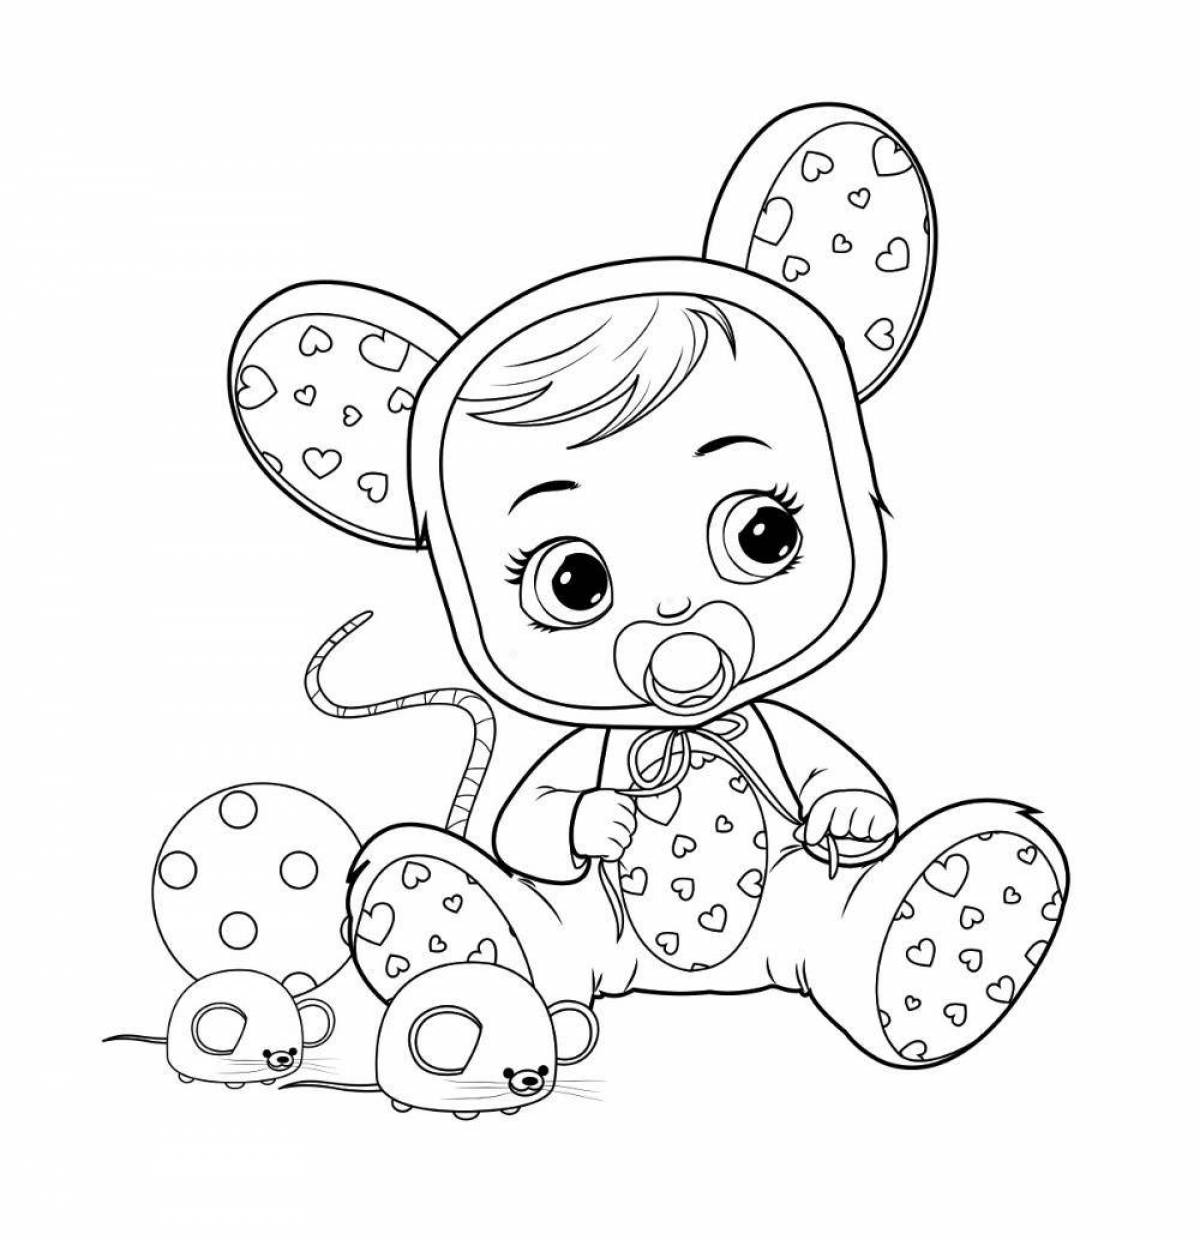 Lovely cry babies coloring page